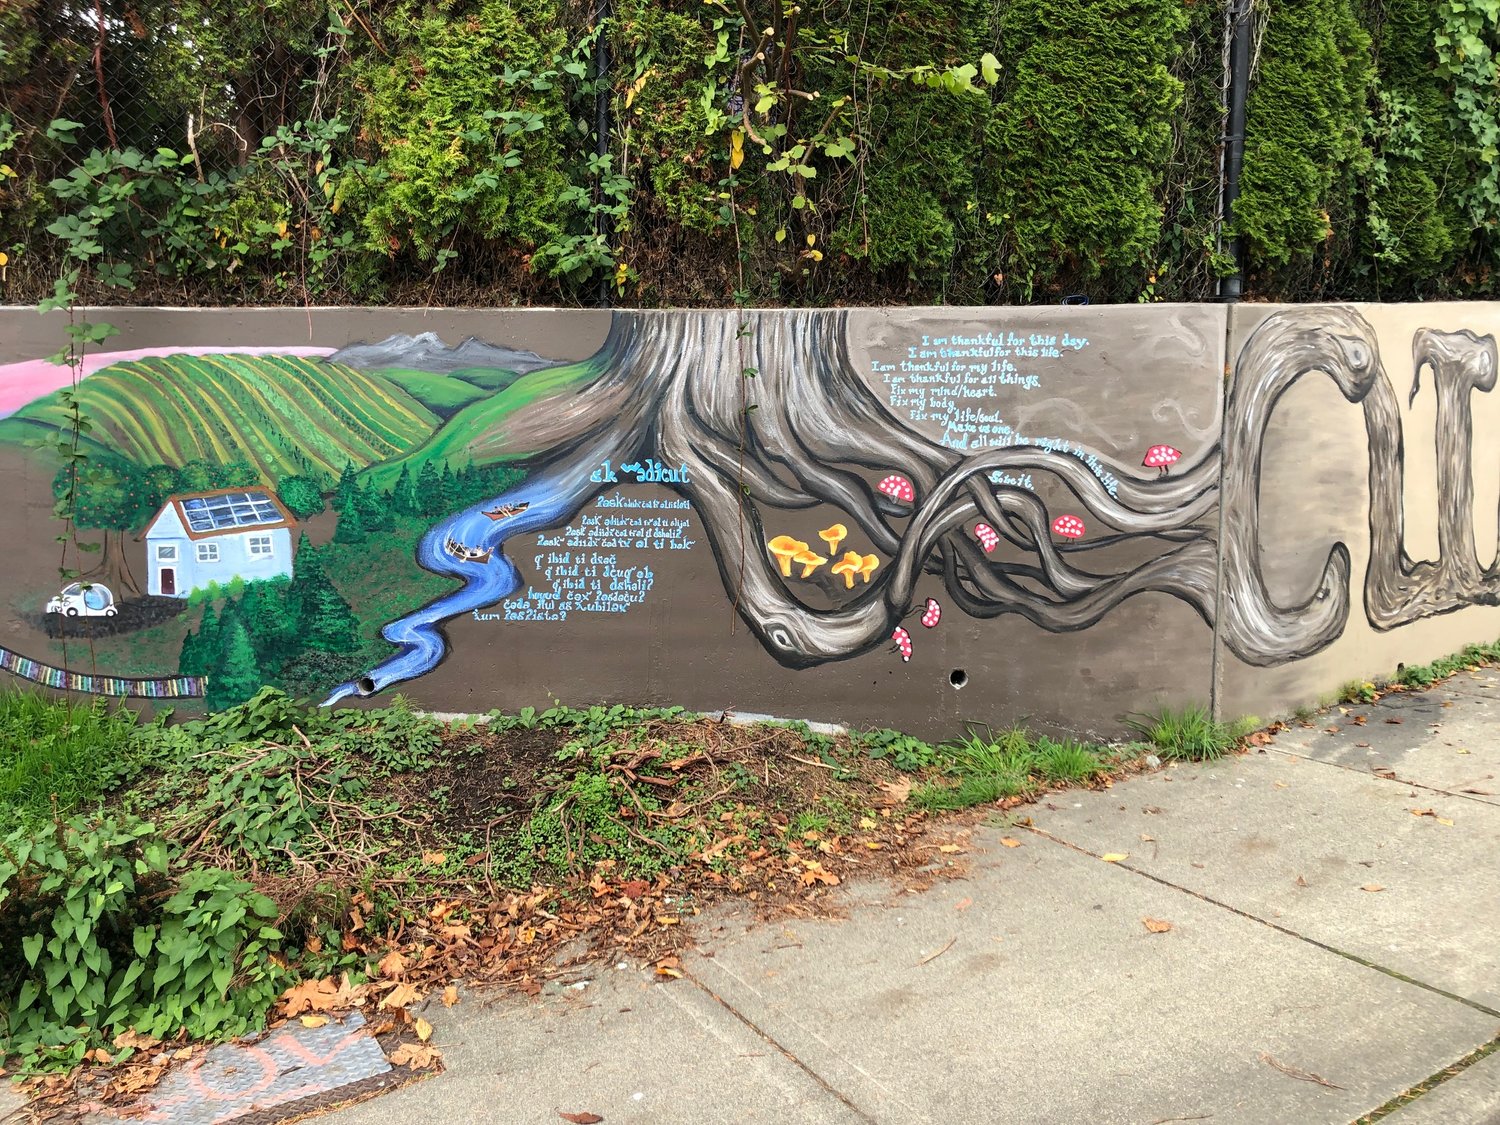 Both Lushootseed and English versions of the Native American prayer are shown in this image of the Climate Justice Wall in west Olympia.